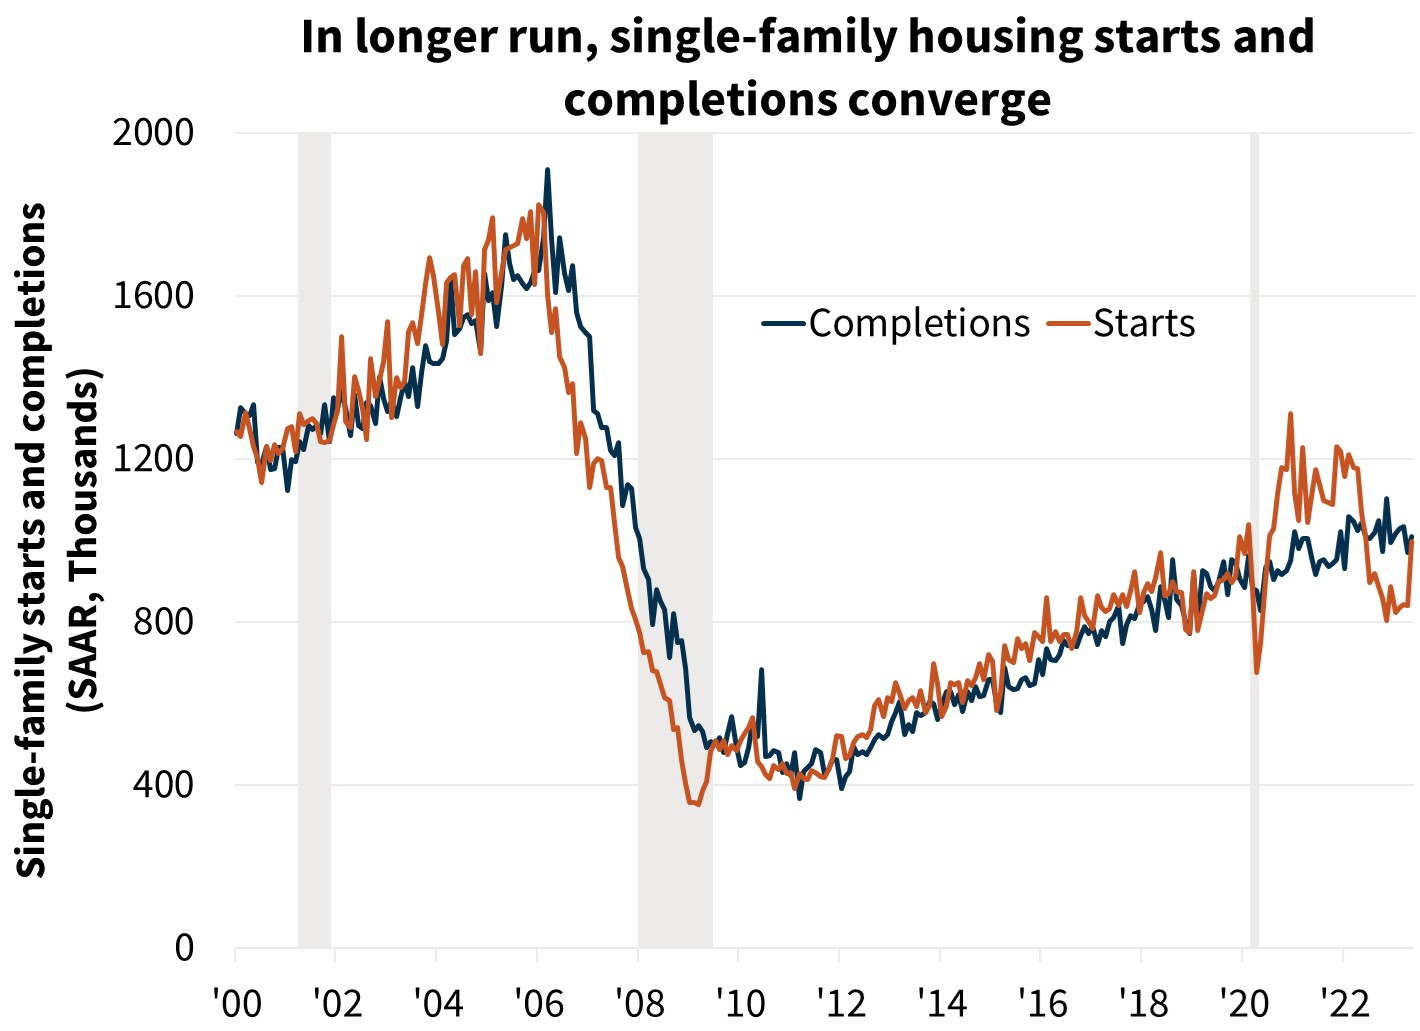  In longer run, single-family housing starts and completions converge 